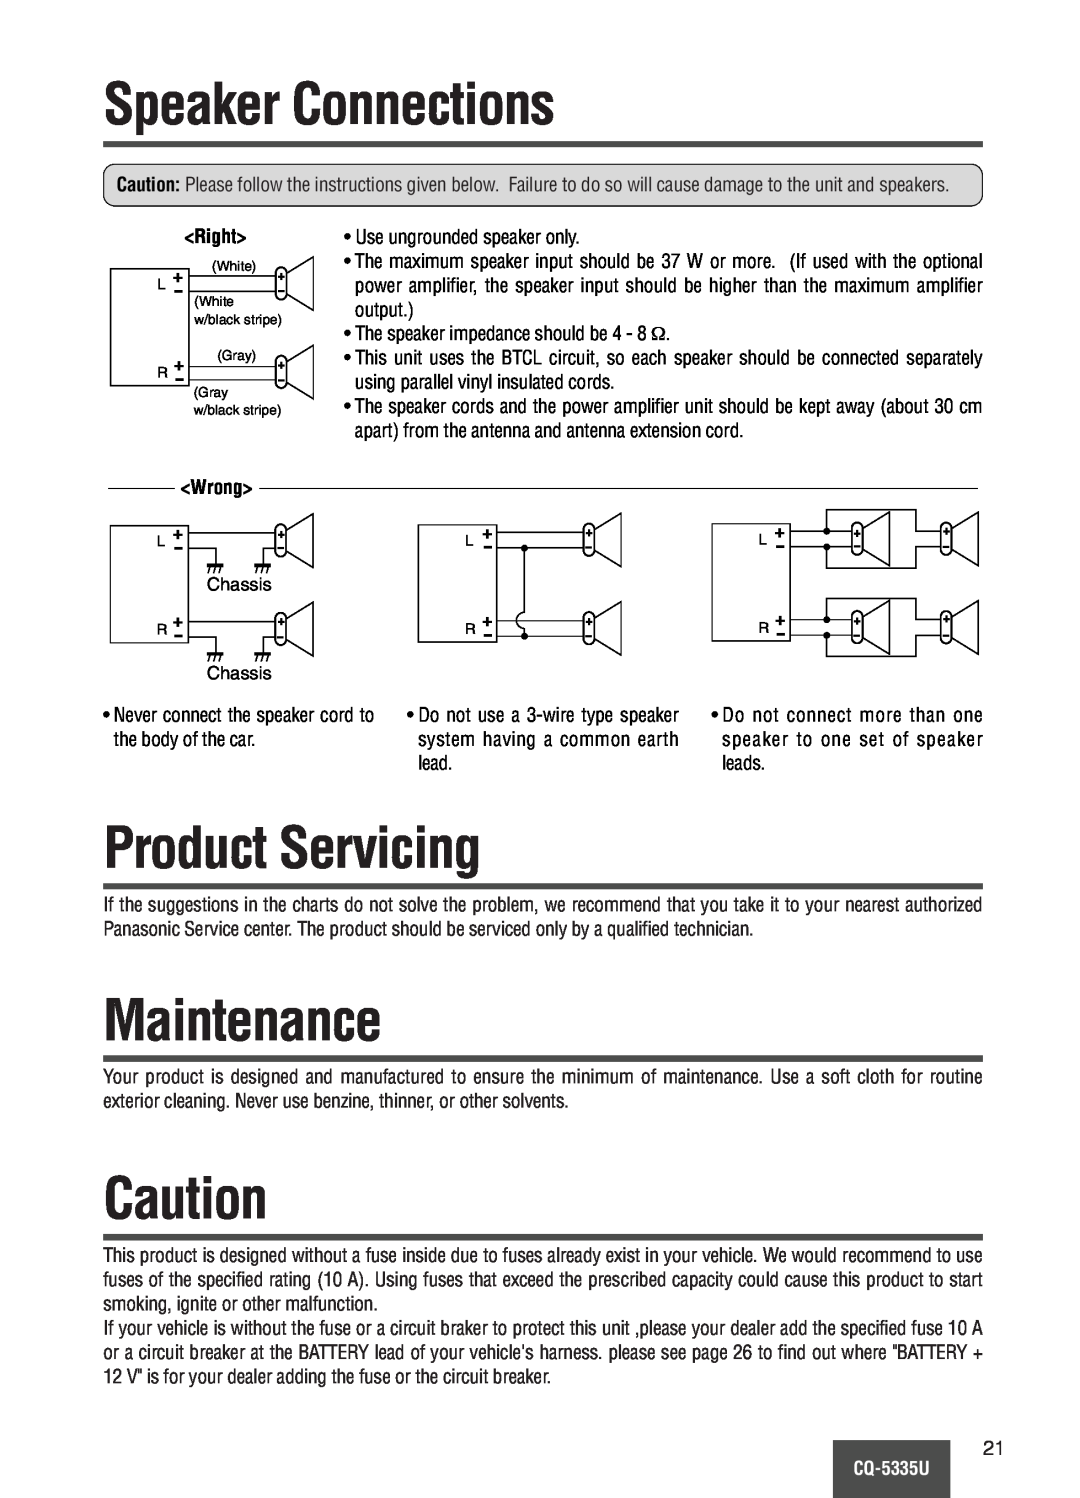 Panasonic CQ-5335U operating instructions Speaker Connections, Product Servicing, Maintenance, Wrong, Chassis 